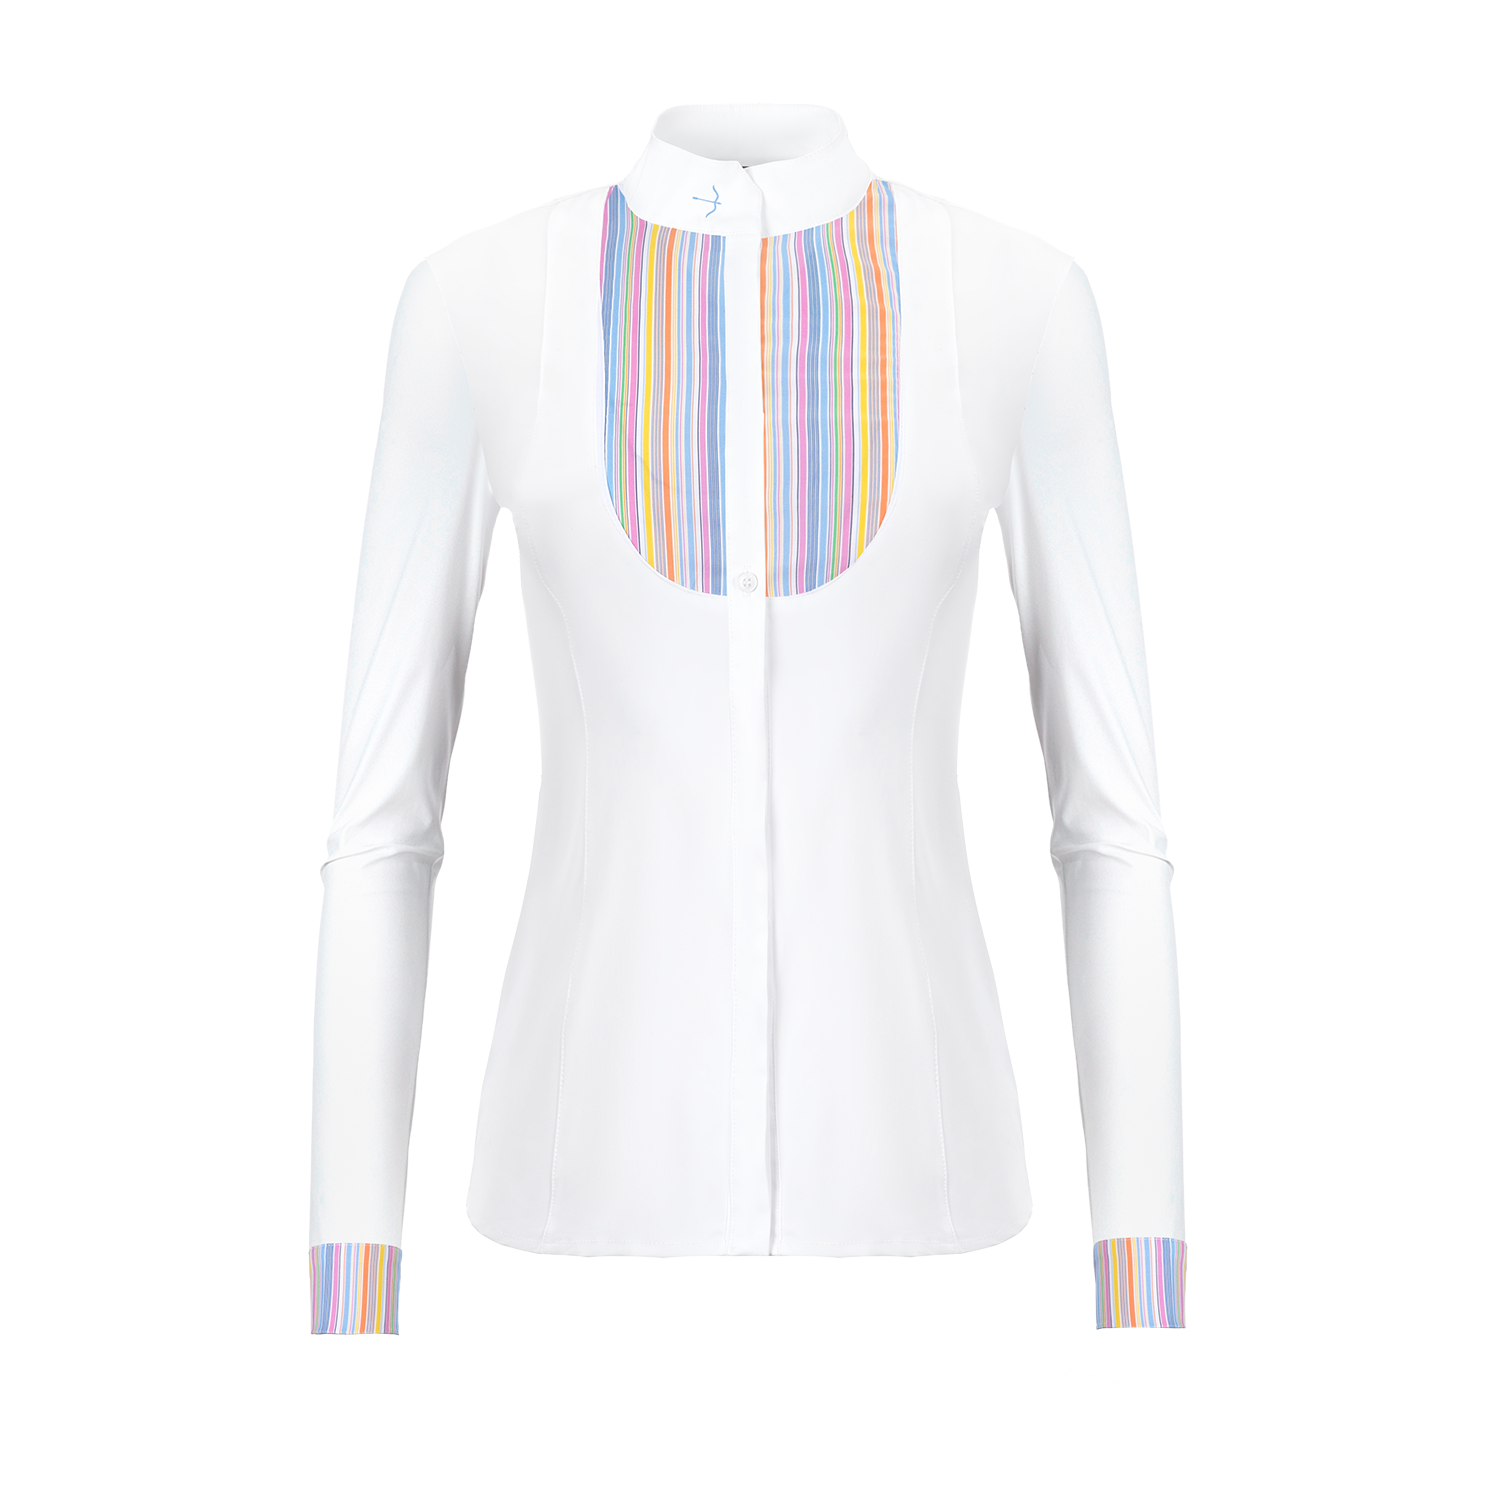 The Laguso Laila Smoking multi stripe is made from soft stretchy jersey for maximum comfort and movement. A fine woven stretch stripe fabric on the bib and cuffs gives the shirt a modern twist. button down front with hidden button to stop popping. Cross over button stand with the Laguso logo. 